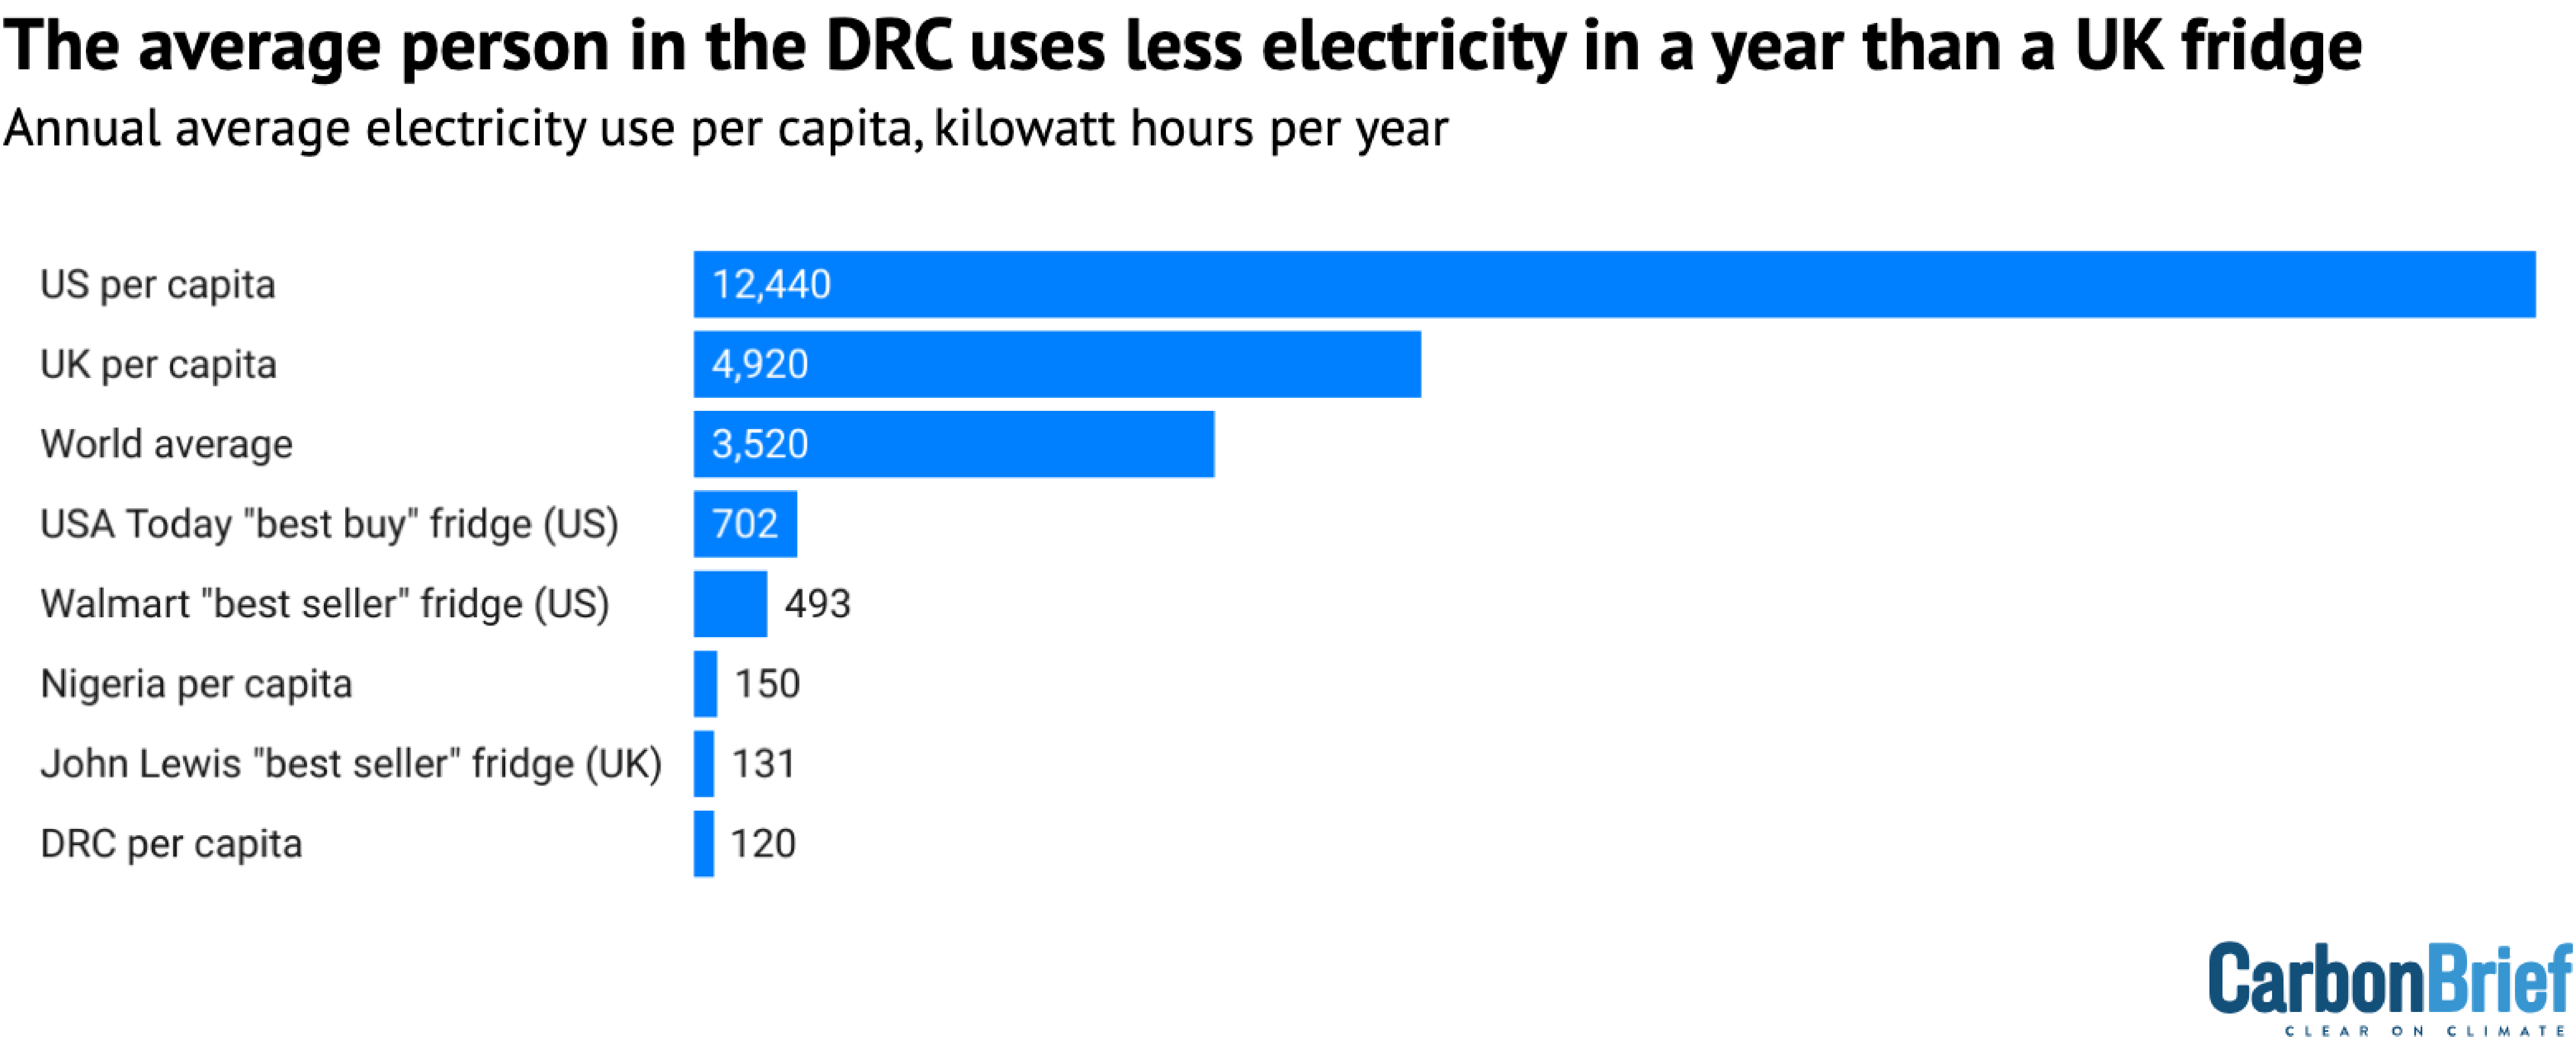 Annual average electricity use per capita for the US, the UK, the world, Nigeria and the DRC, compared to three fridge models from the UK and the US. 